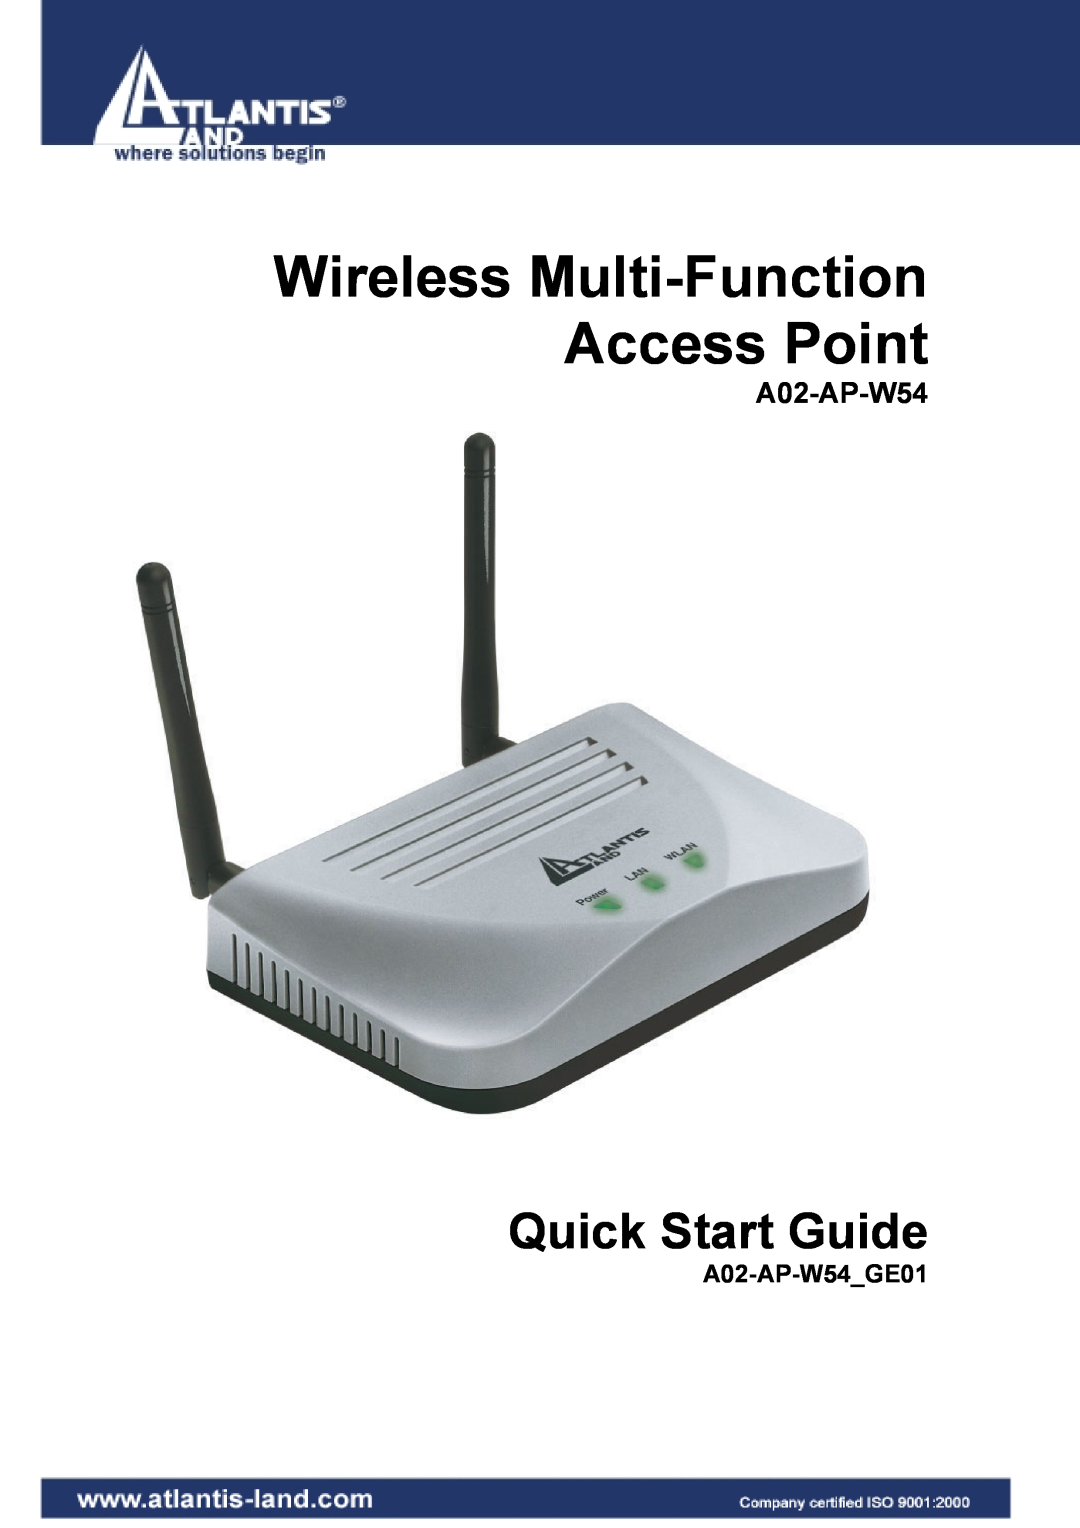 Atlantis Land A02-AP-W54_GE01 quick start Wireless Multi-Function Access Point, Quick Start Guide, A02-AP-W54GE01 